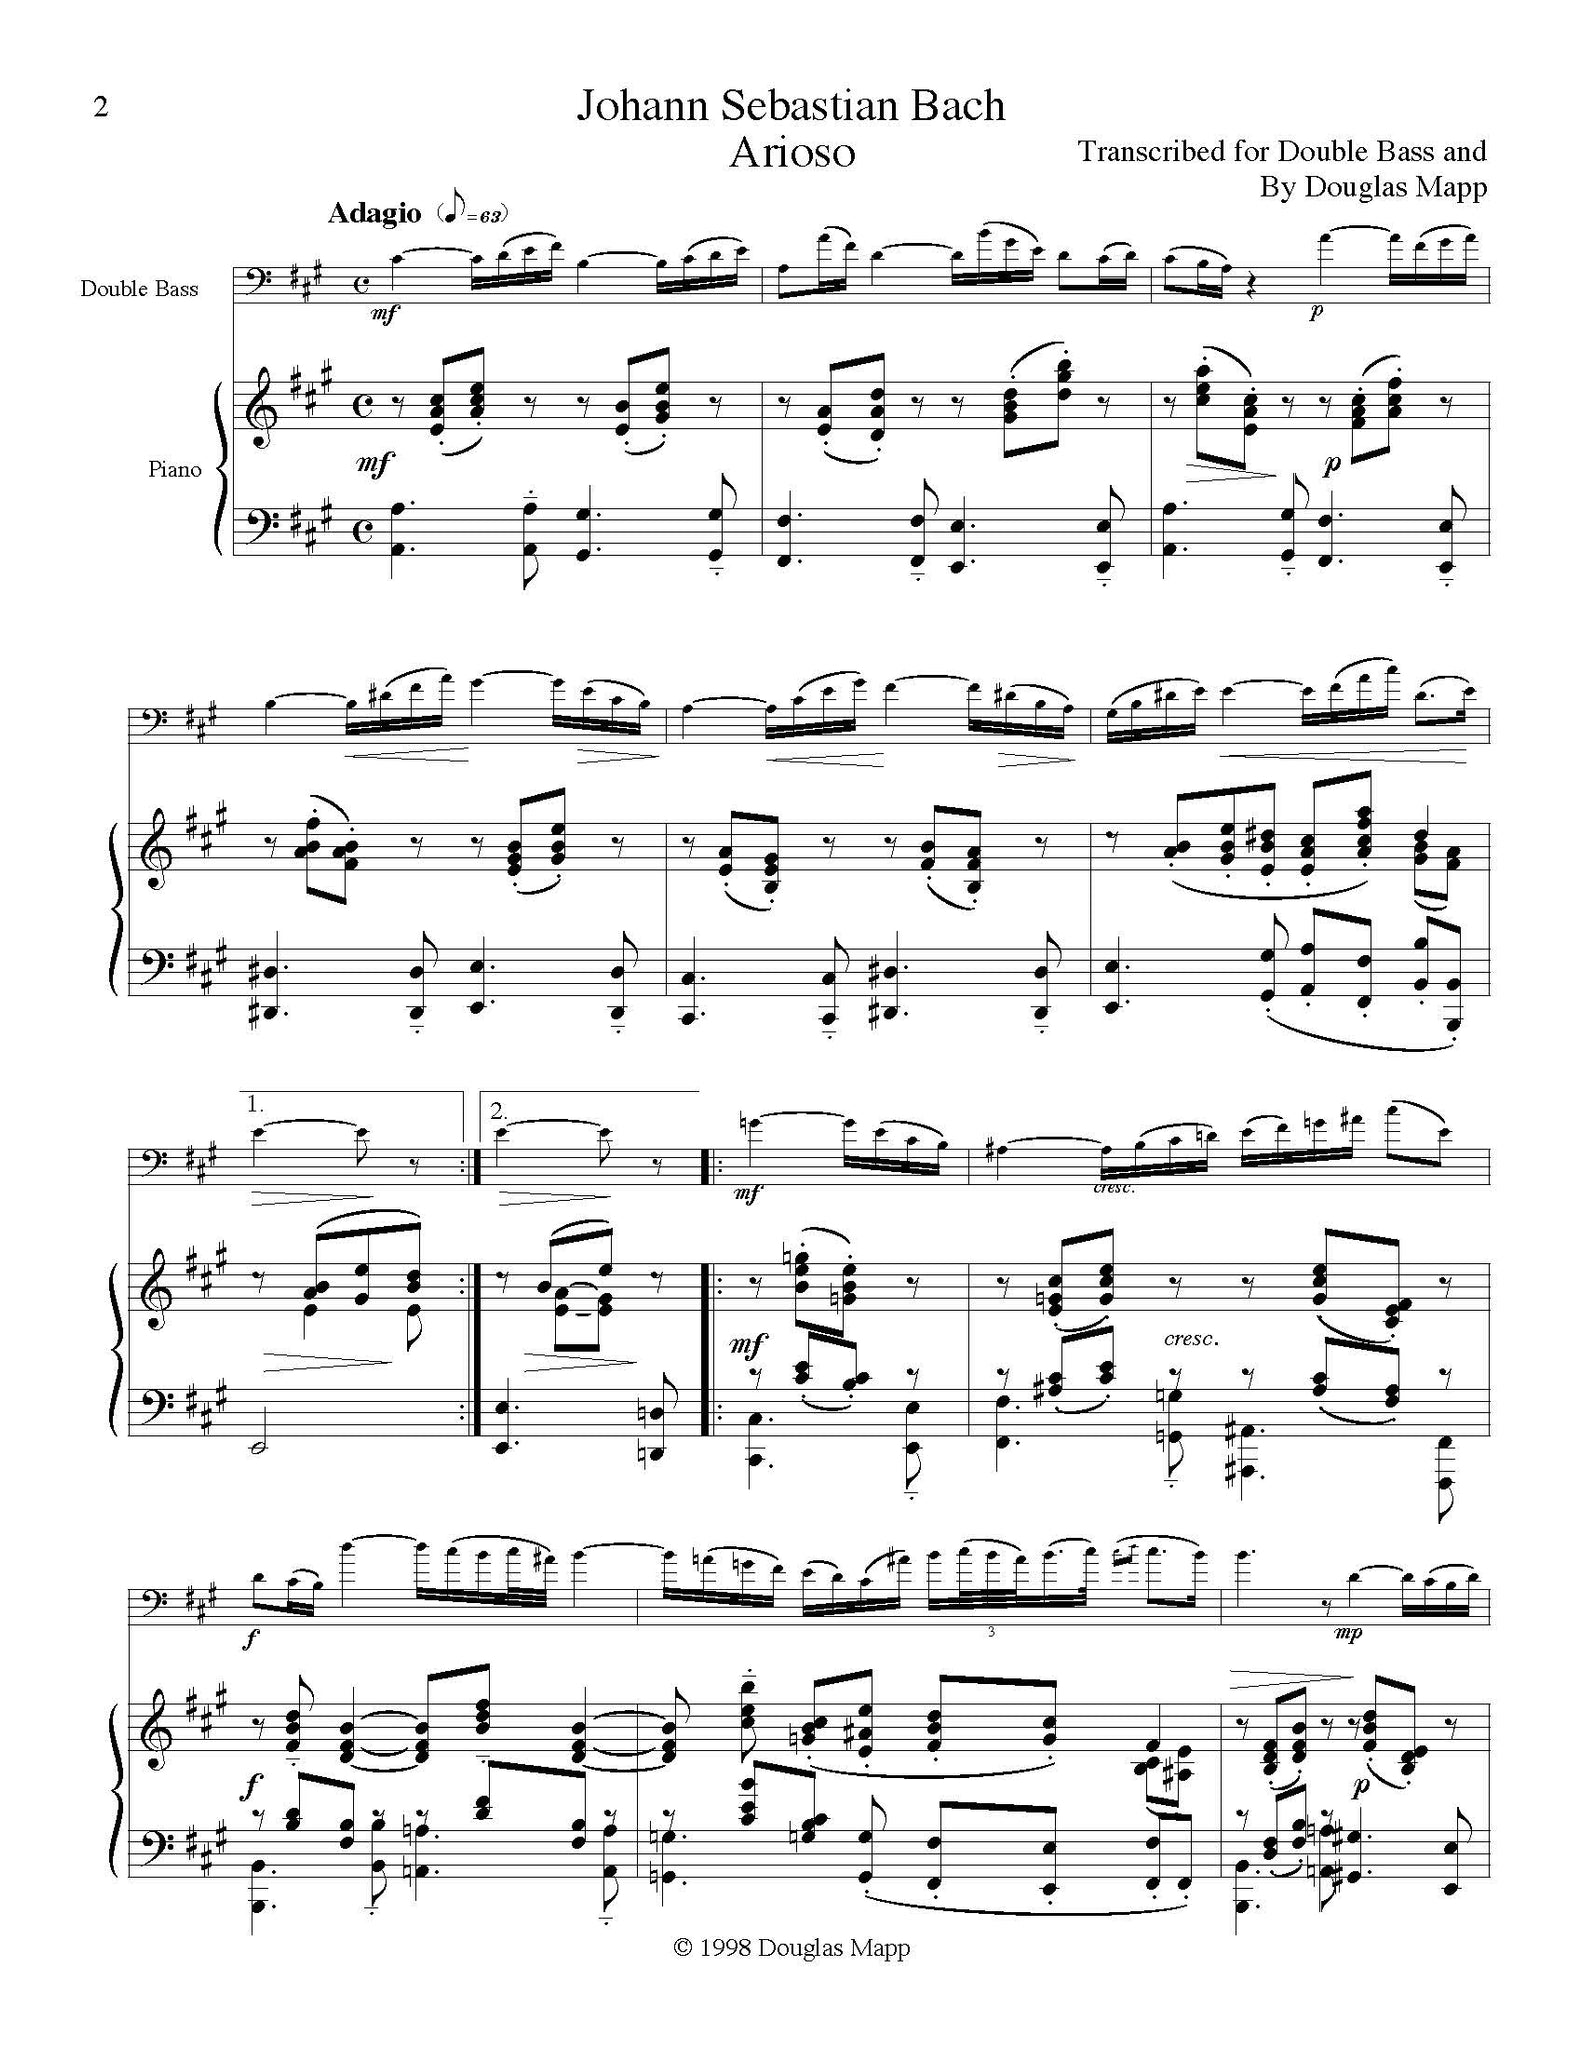 Bach Arioso solo tuning Page 1